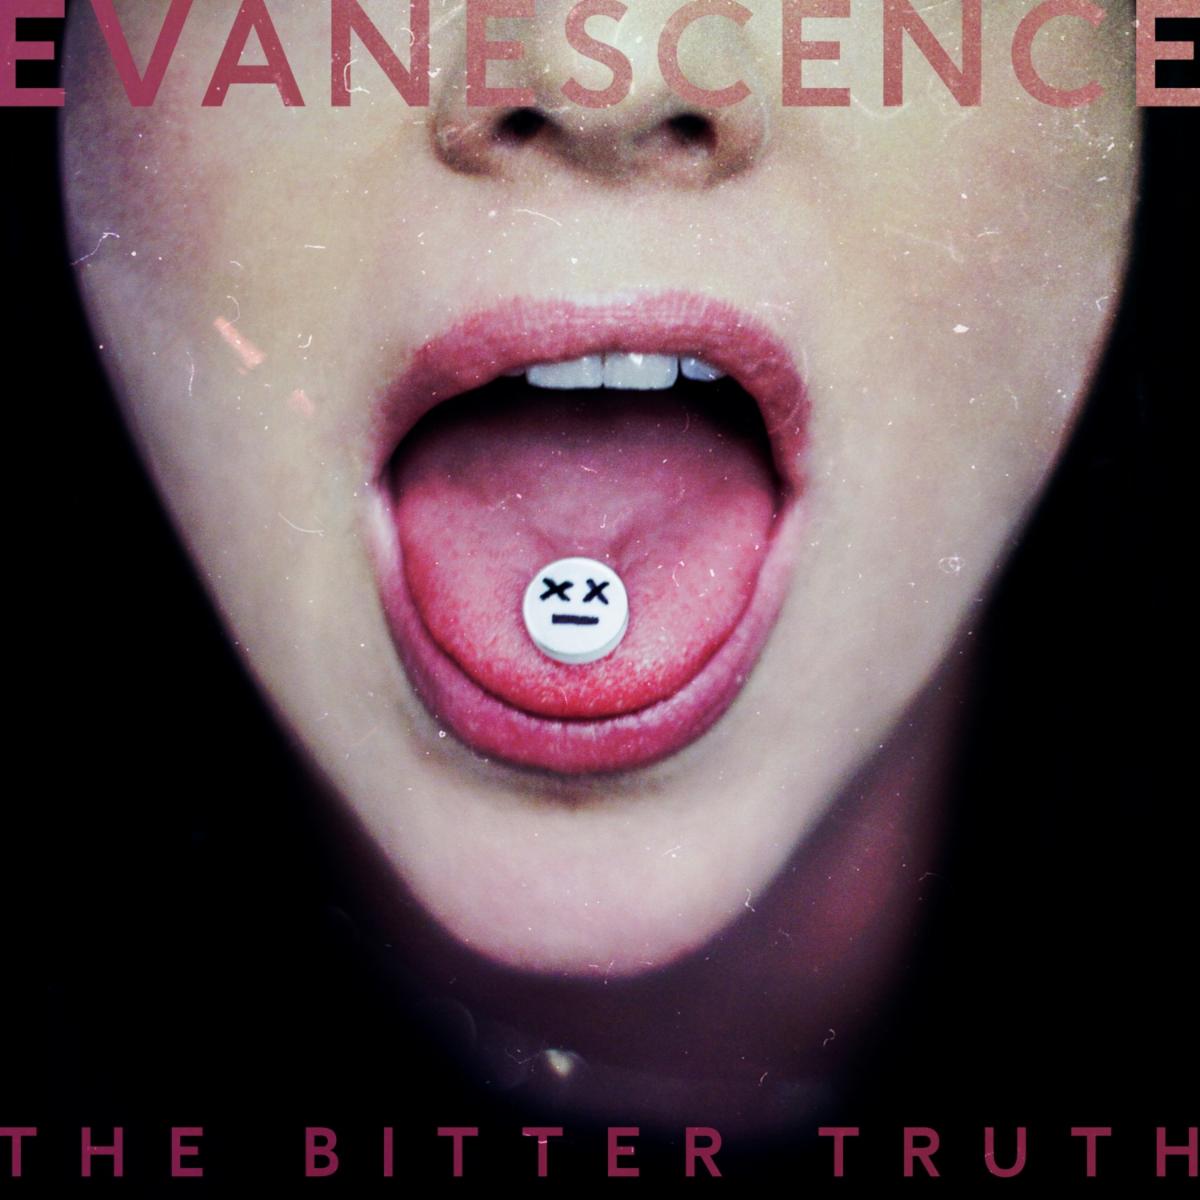 Evanescence's New Album 'The Bitter Truth' Coming March 26th, 2021